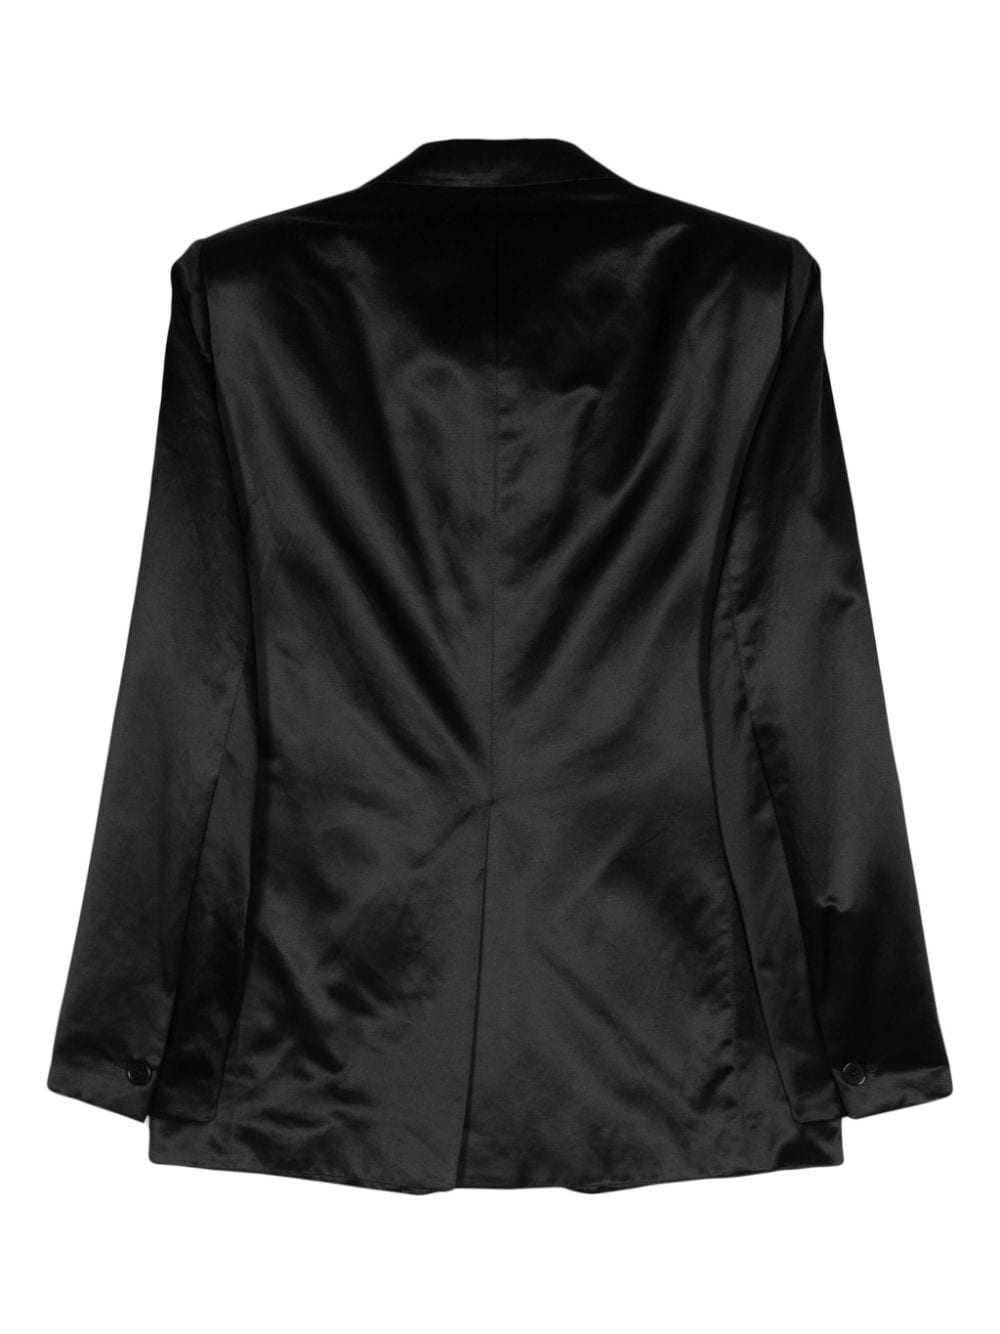 Romeo Gigli Pre-Owned 2000s single-breasted satin… - image 2